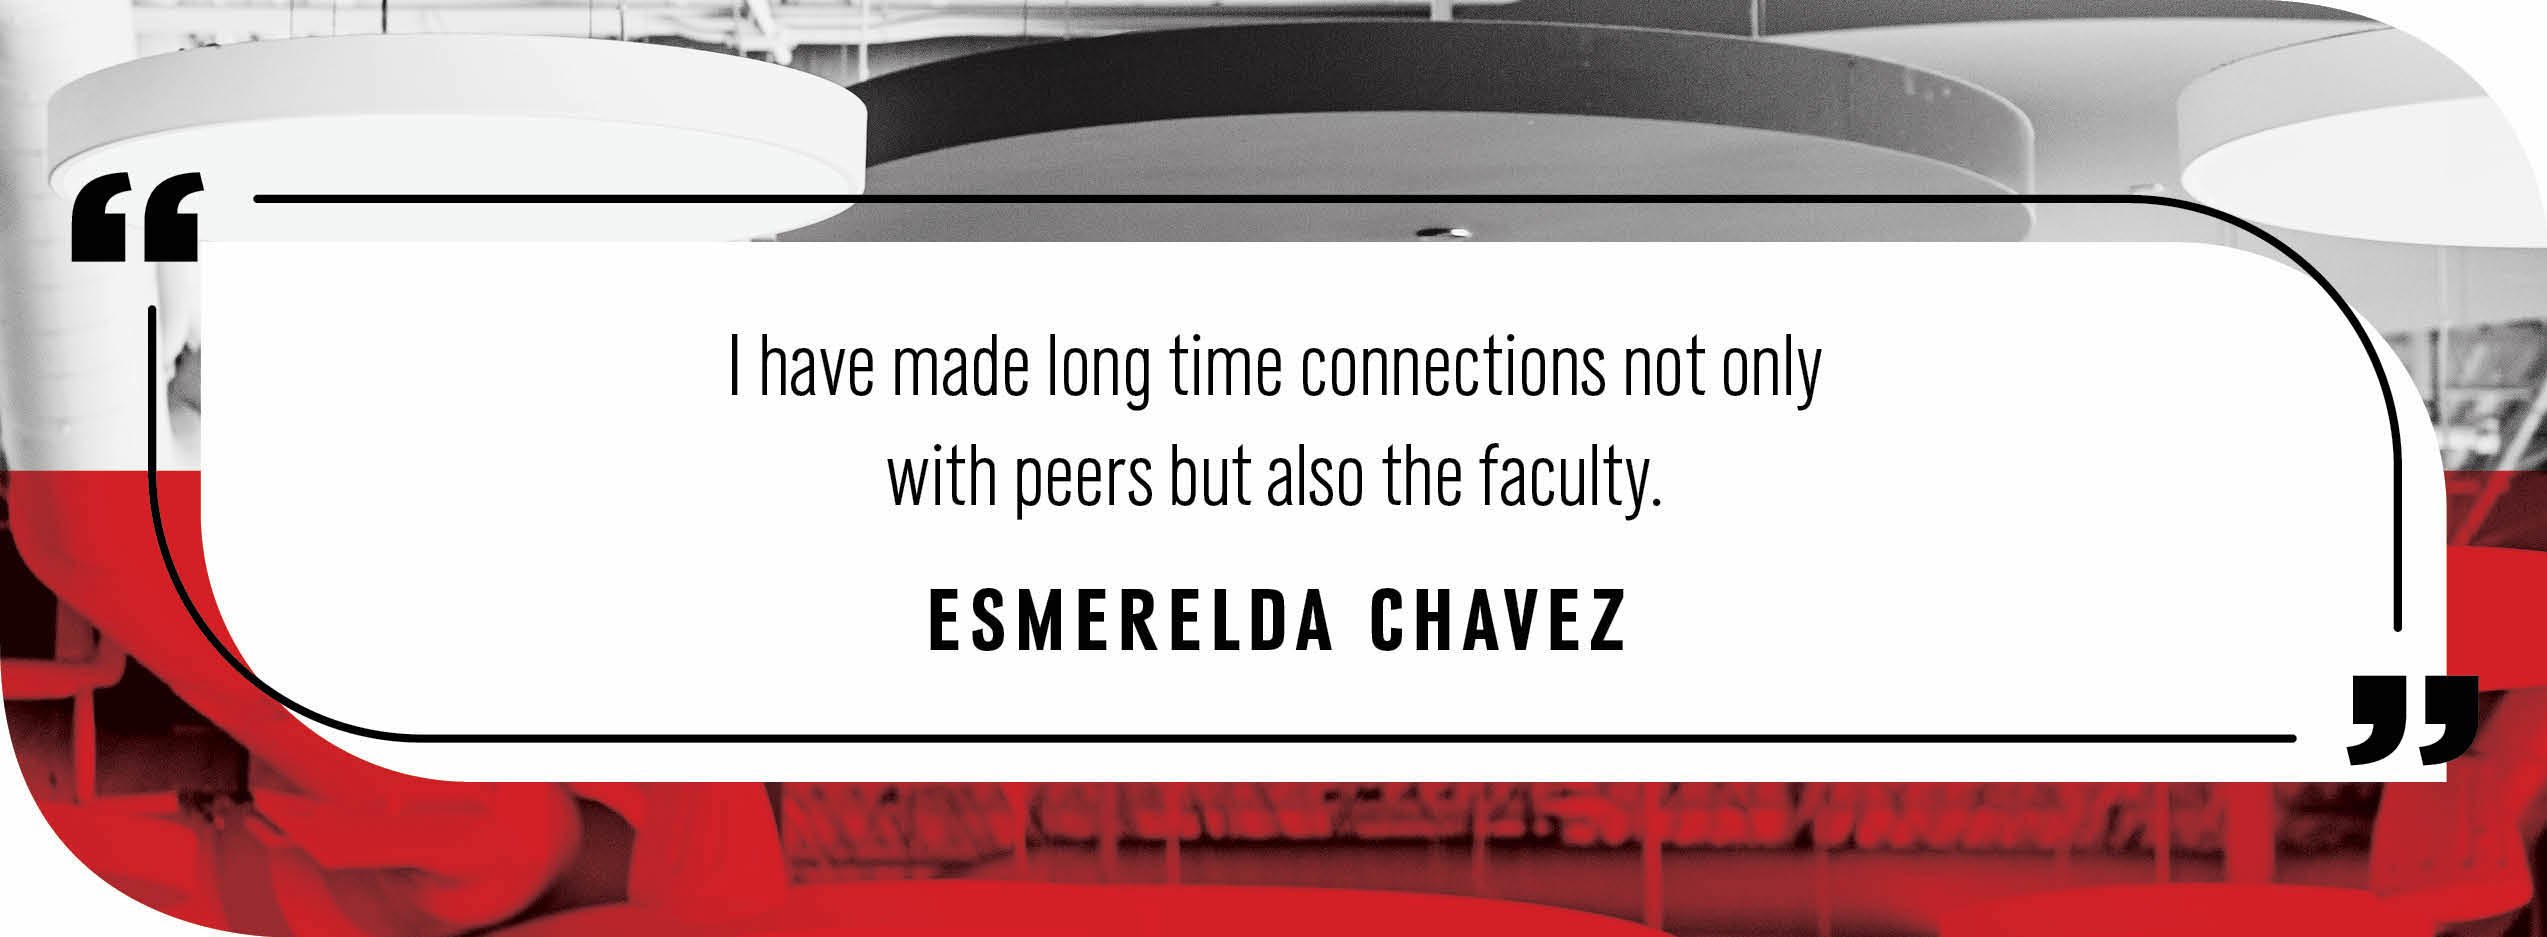 Quote by Esmerelda Chavez: "I have made long time connections not only with peers but also the faculty."